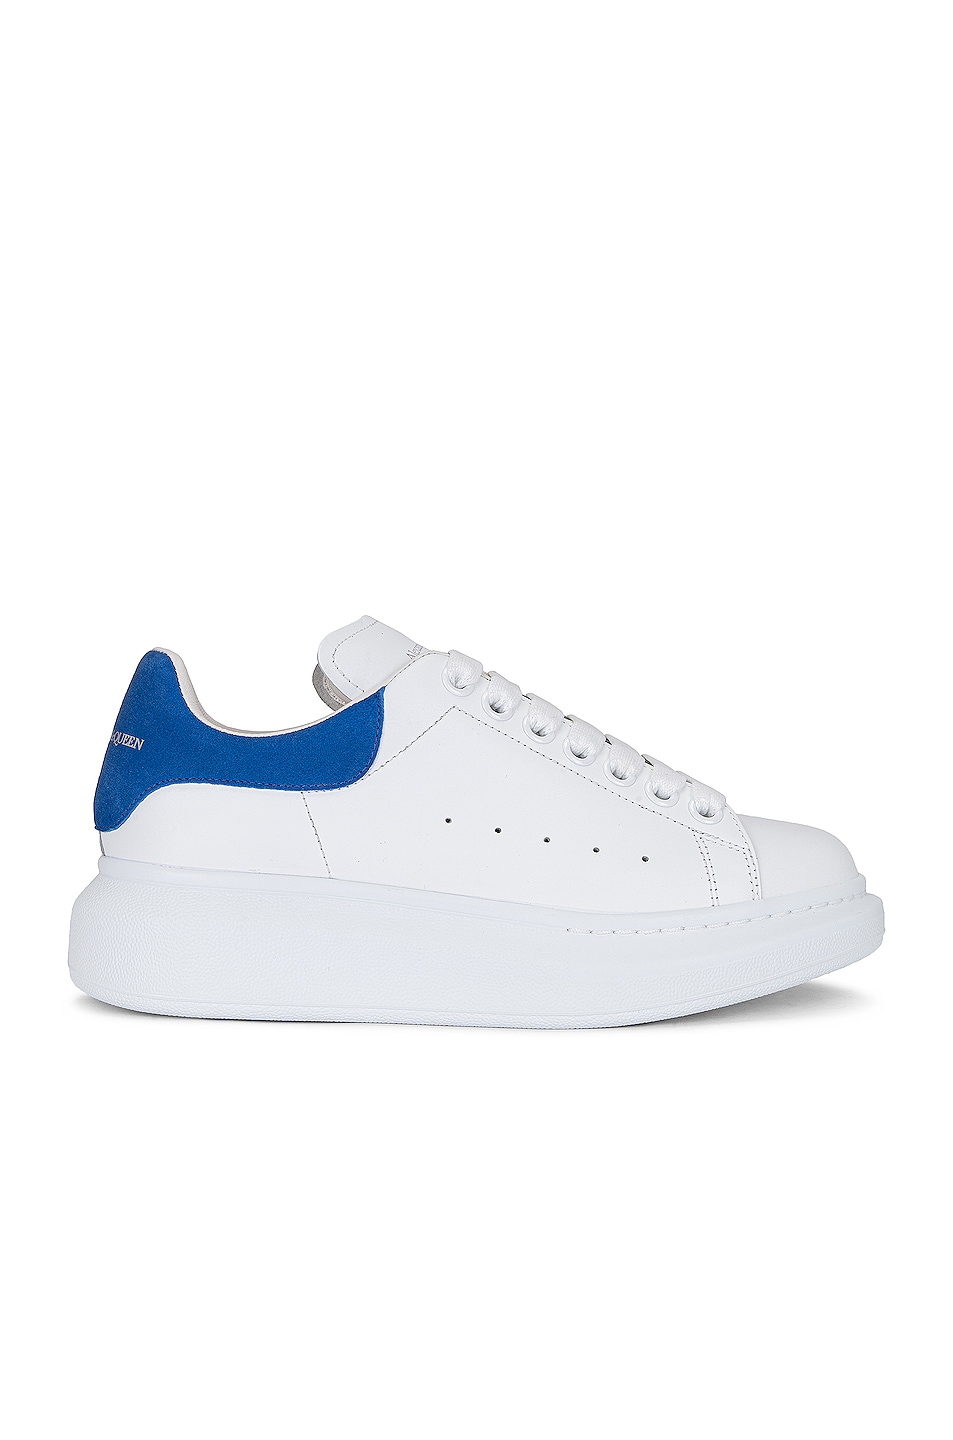 Image 1 of Alexander McQueen Leather & Rubber Sneakers in White & Electric Blue